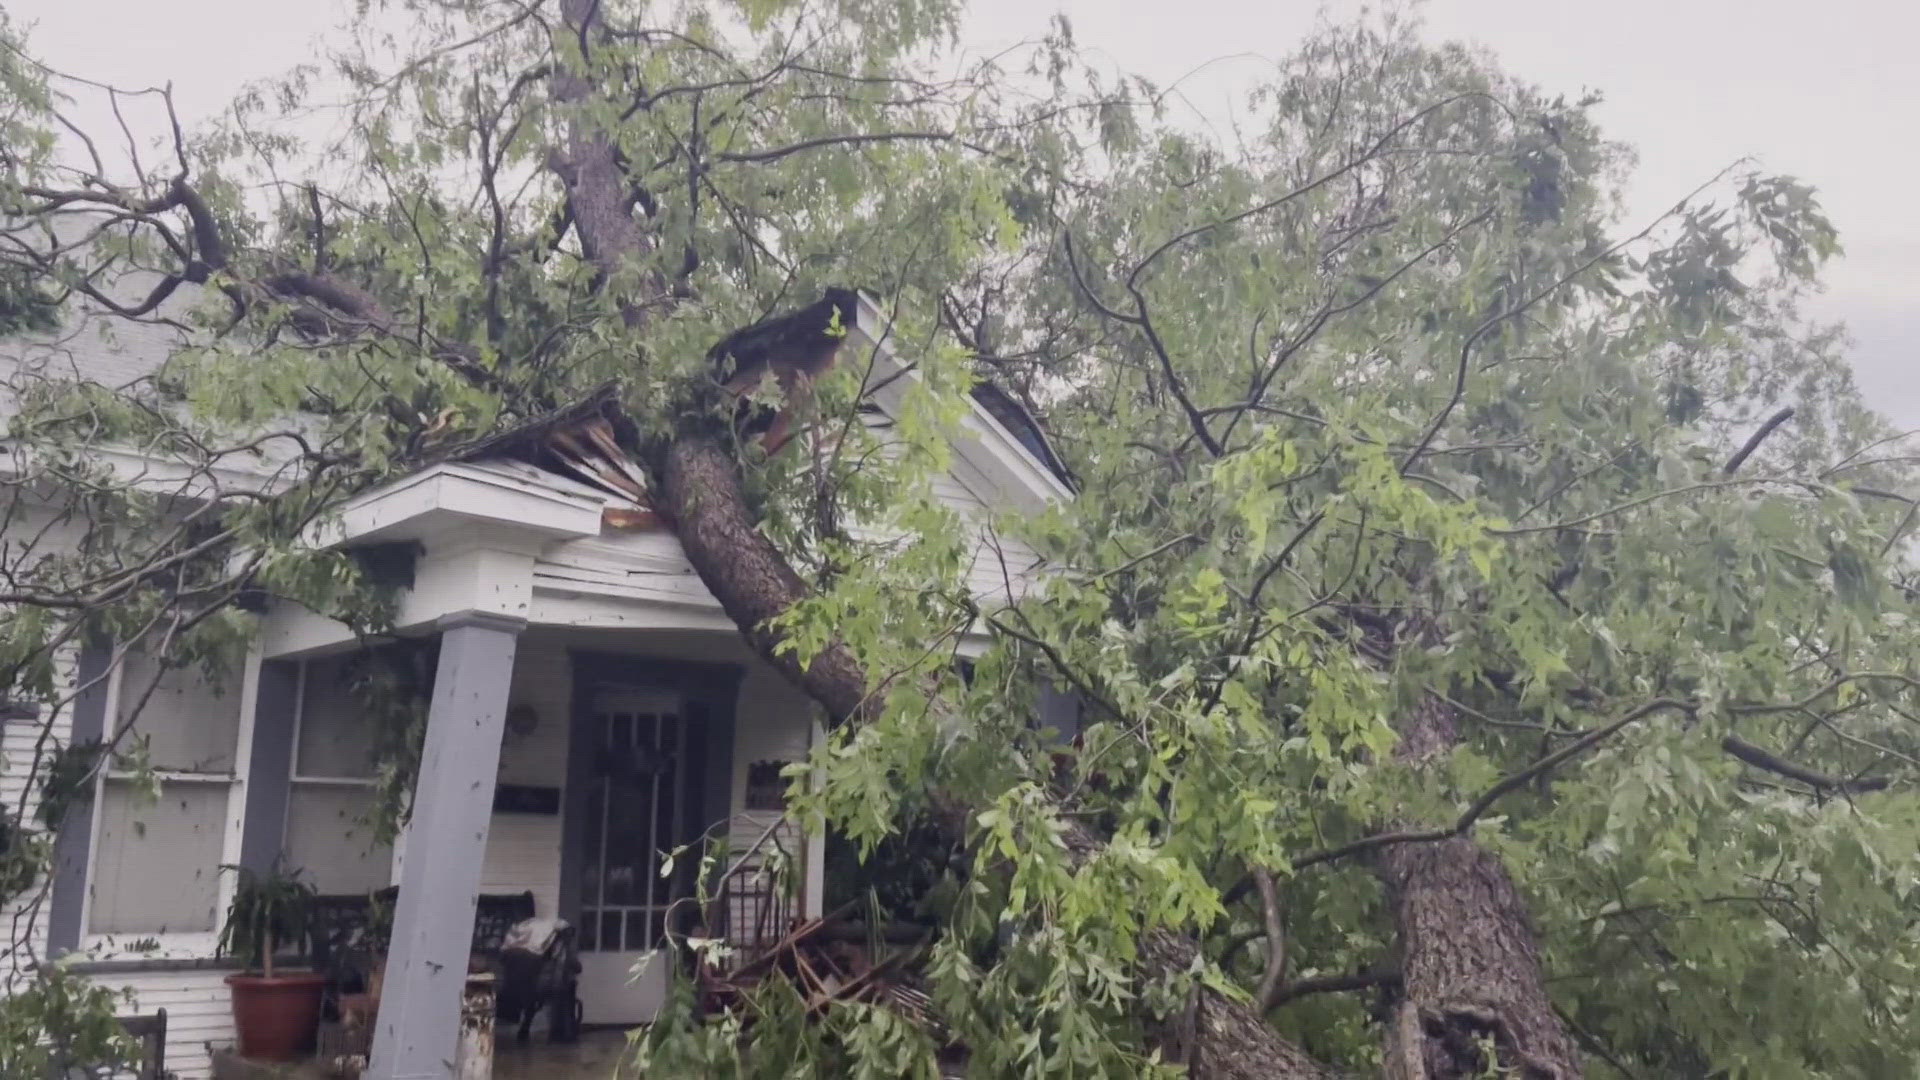 Residents like Cody Hoffman saw trees pulled down, homes damaged and power knocked out.